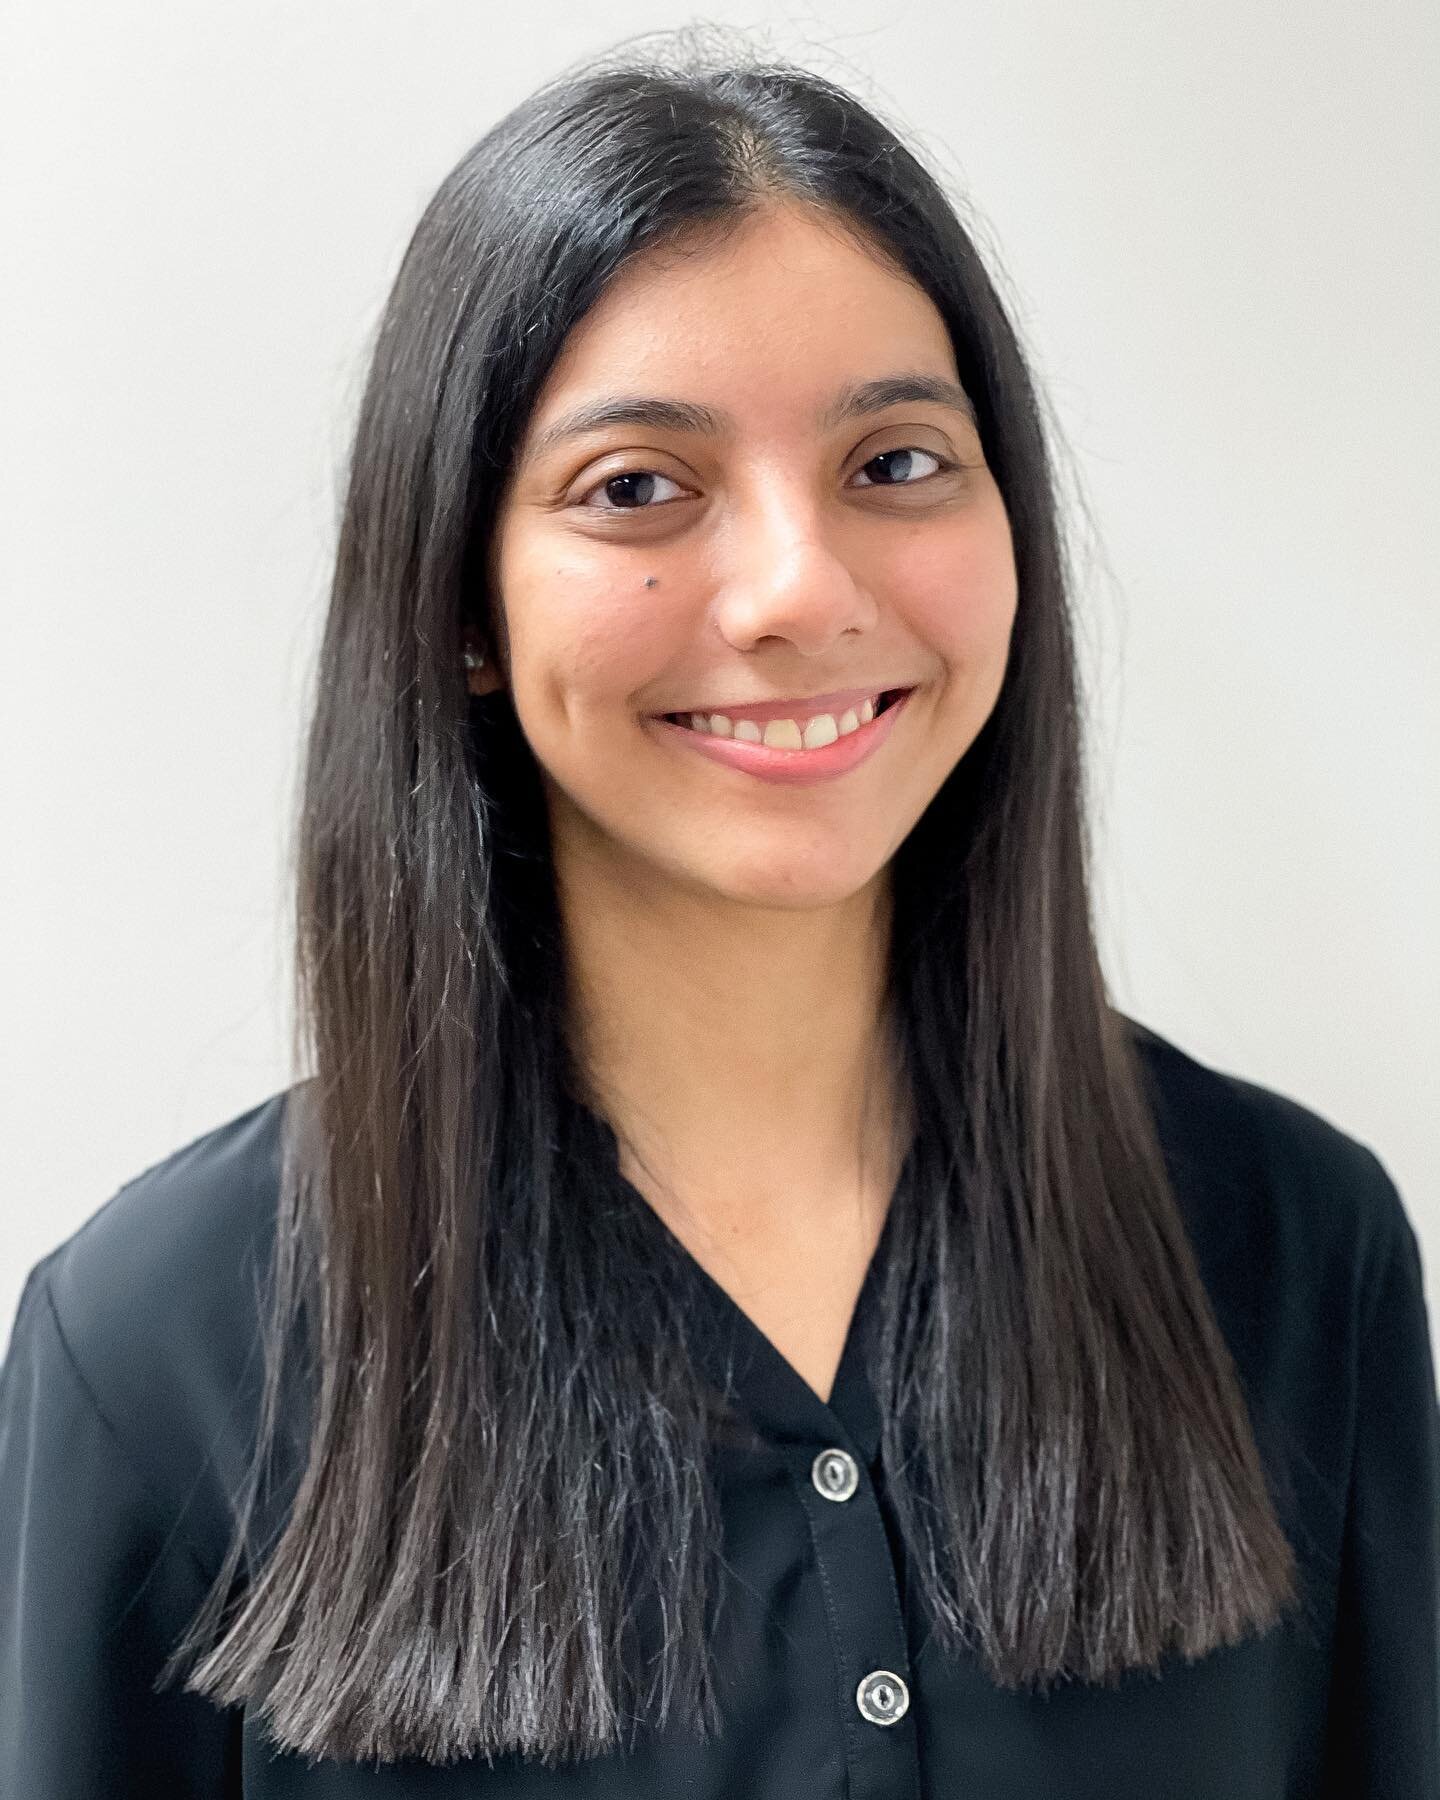 Everyone give a big, warm welcome to Tanisha!⭐️

Tanisha is NOI Hamilton's newest resident physiotherapist. 

She is a big believer in exercise and client-centred care, and combines manual therapy, exercise prescription and patient education in her s